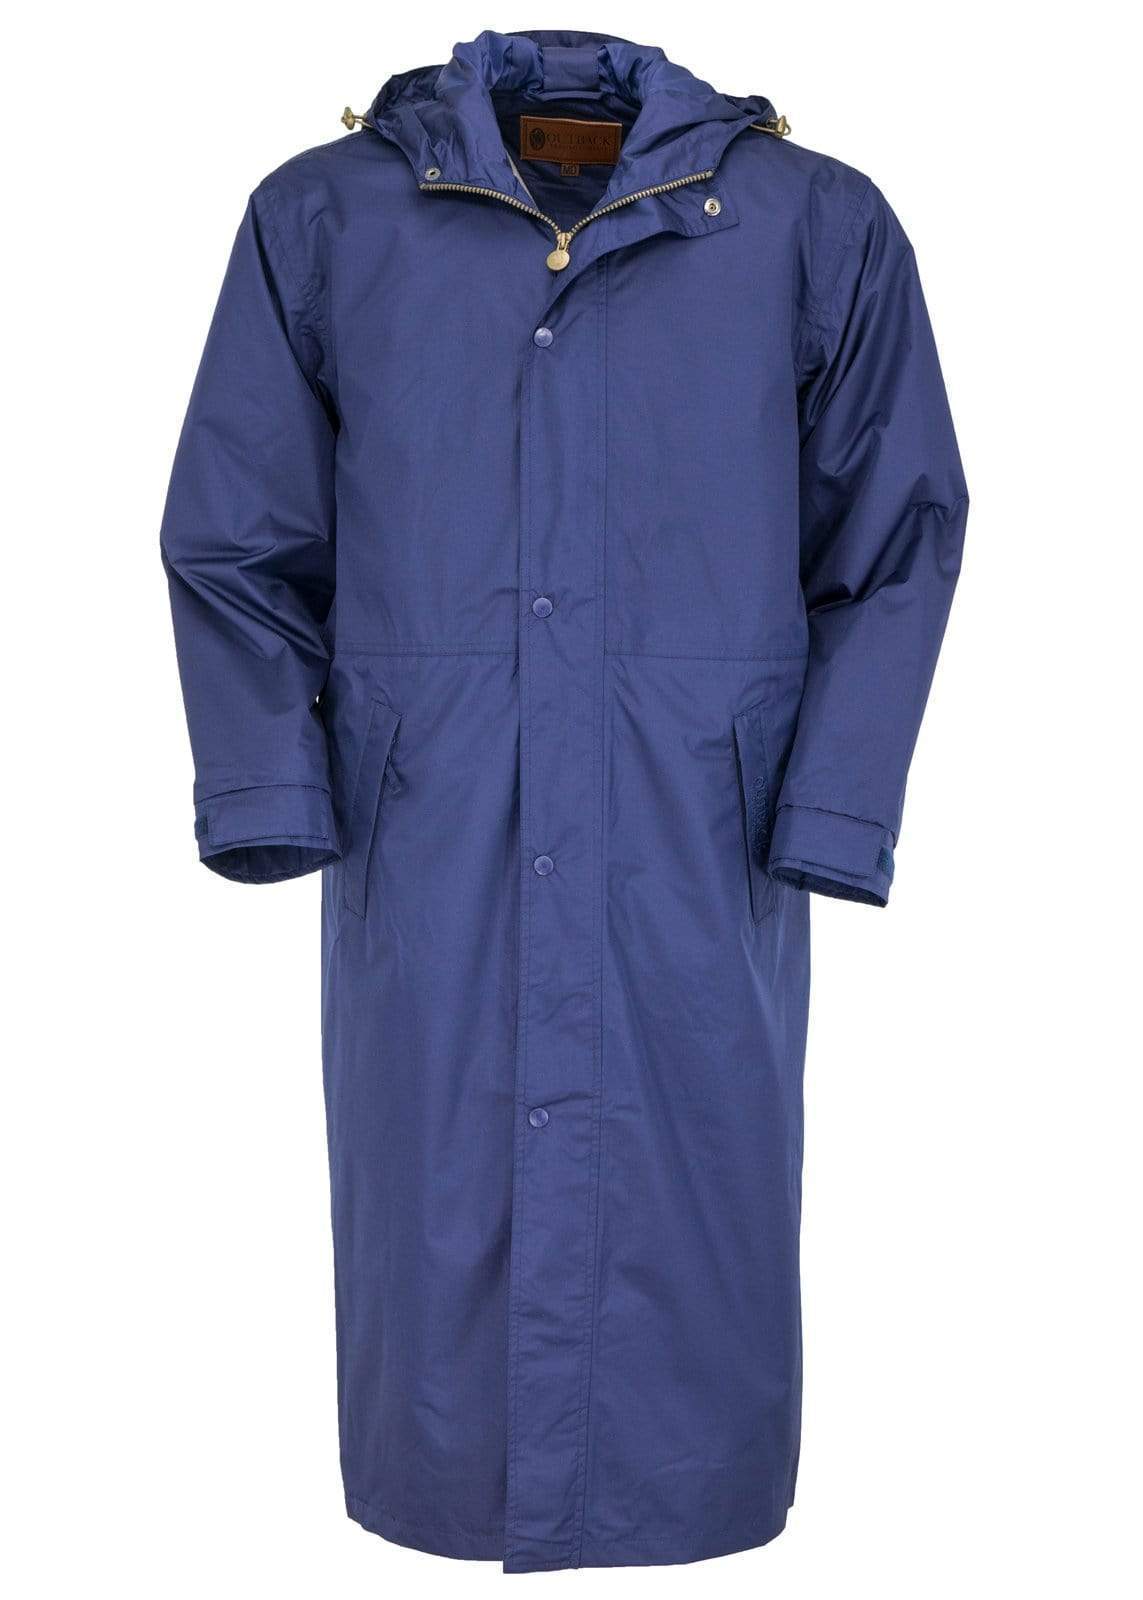 Outback Trading Company Pak-A-Roo Duster Navy / XS 2406-NVY-XS 789043043662 Duster Coats